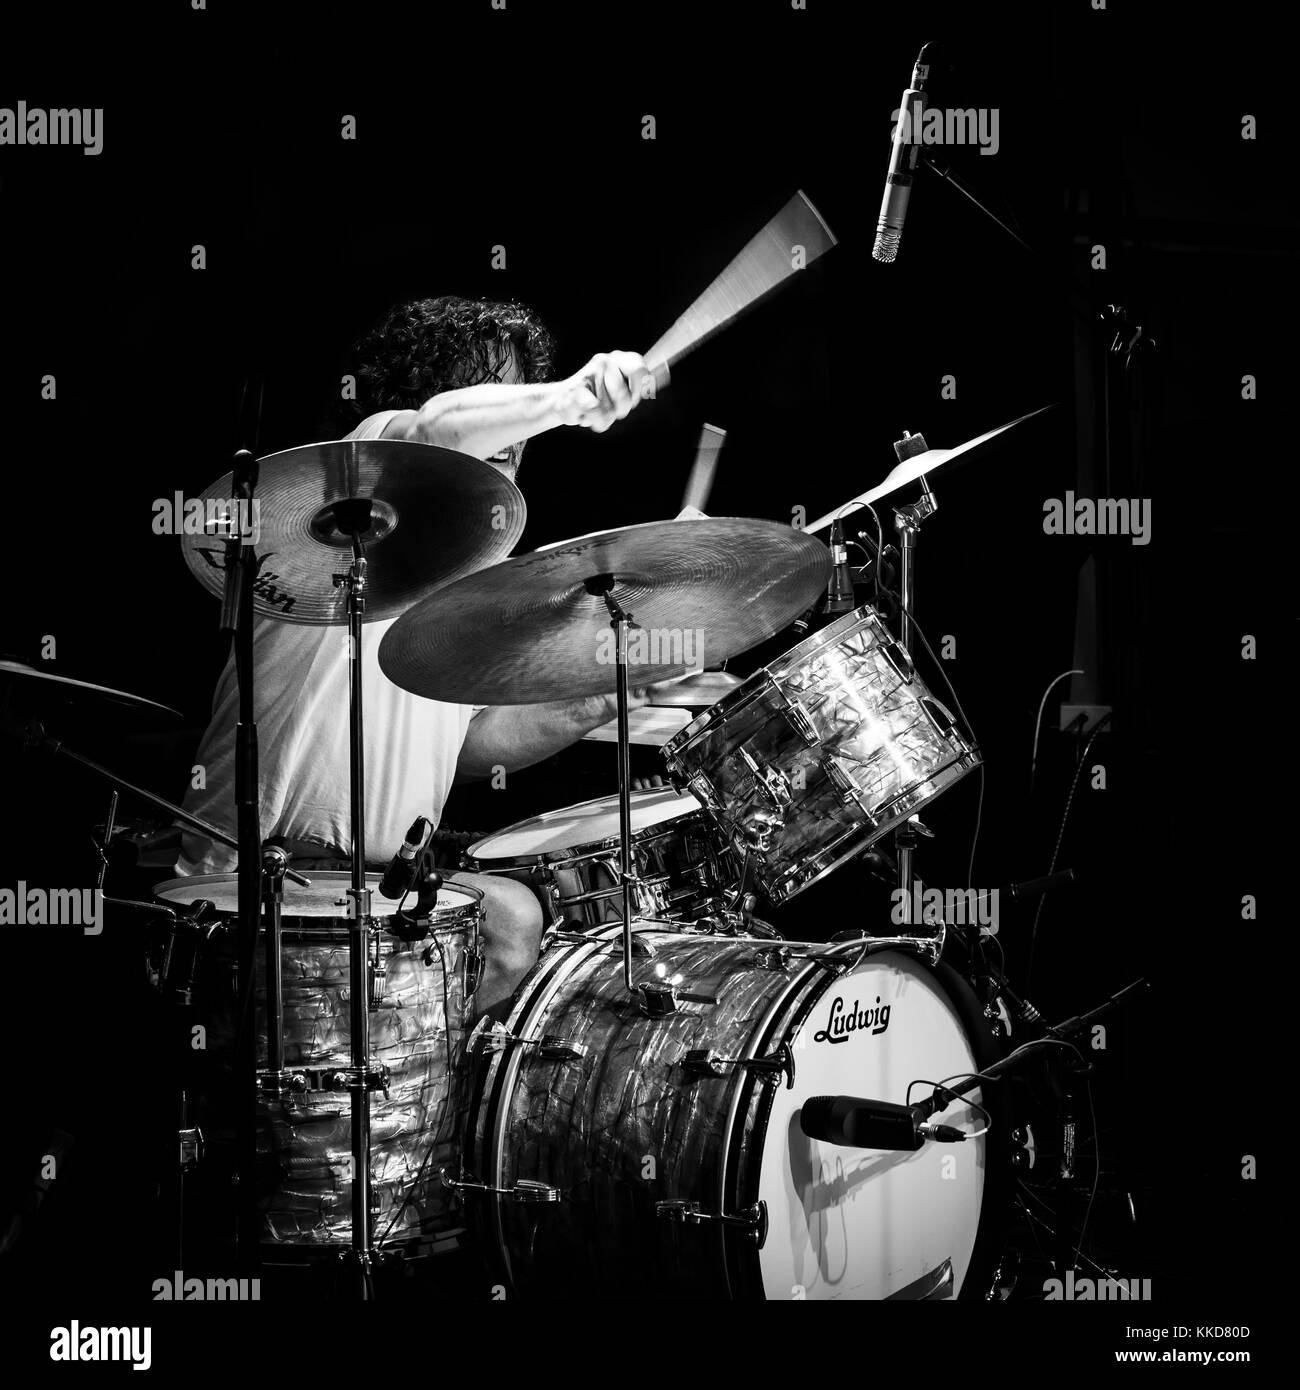 Paul Robinson on the drums Stock Photo: 166863437 - Alamy